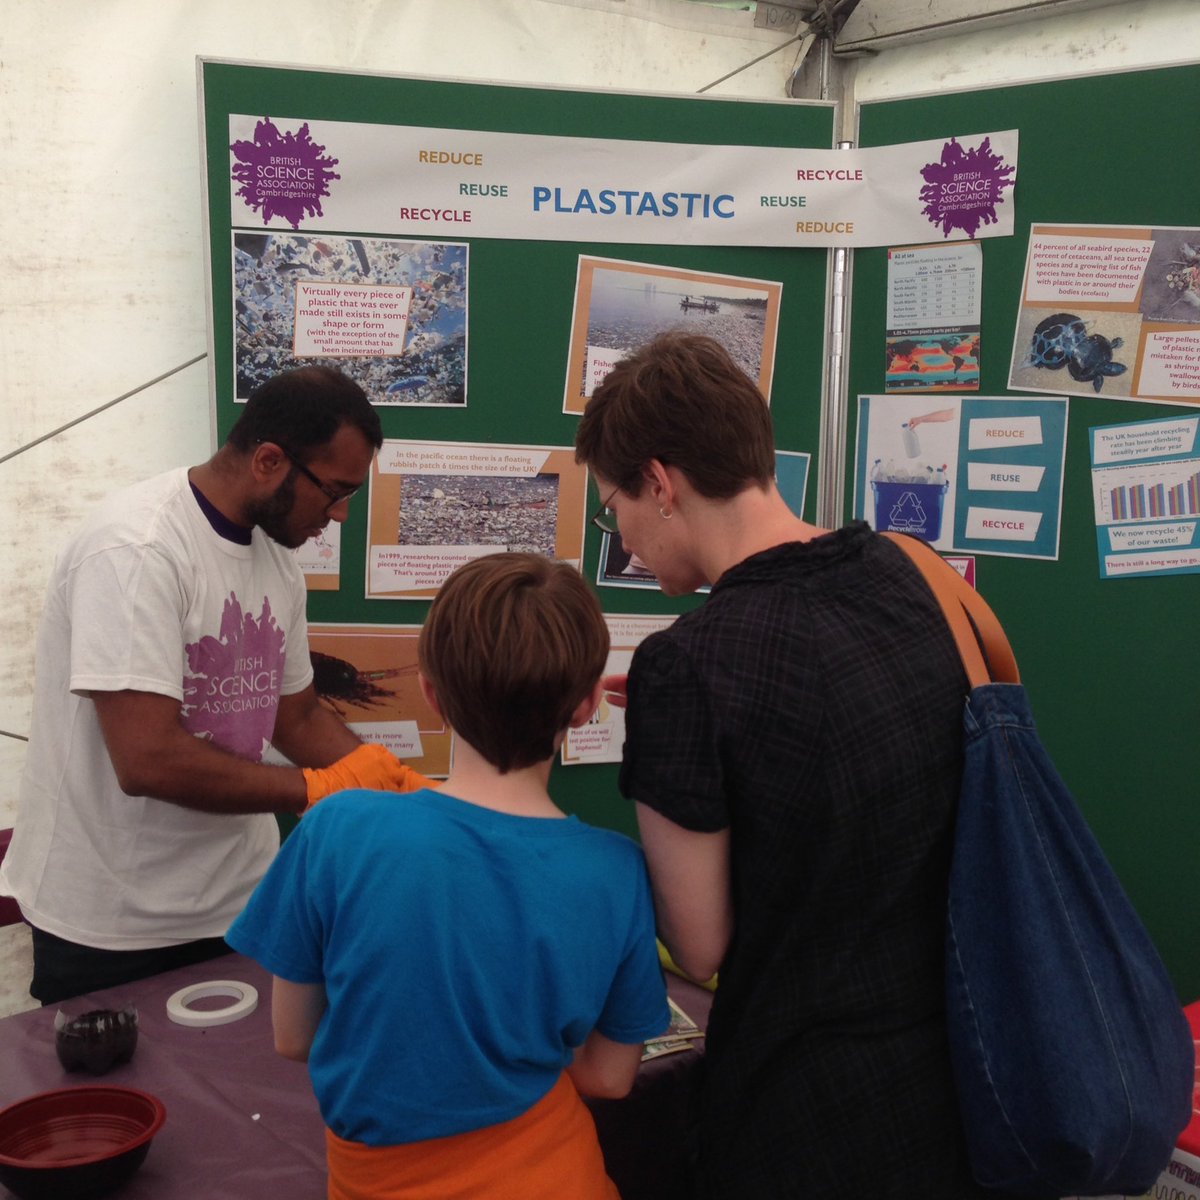 Visit the #ScienceLab an the Cambridge #BigWeekend to learn how to reduce plastic waste @BritSciAssoc @BritSci_Cam